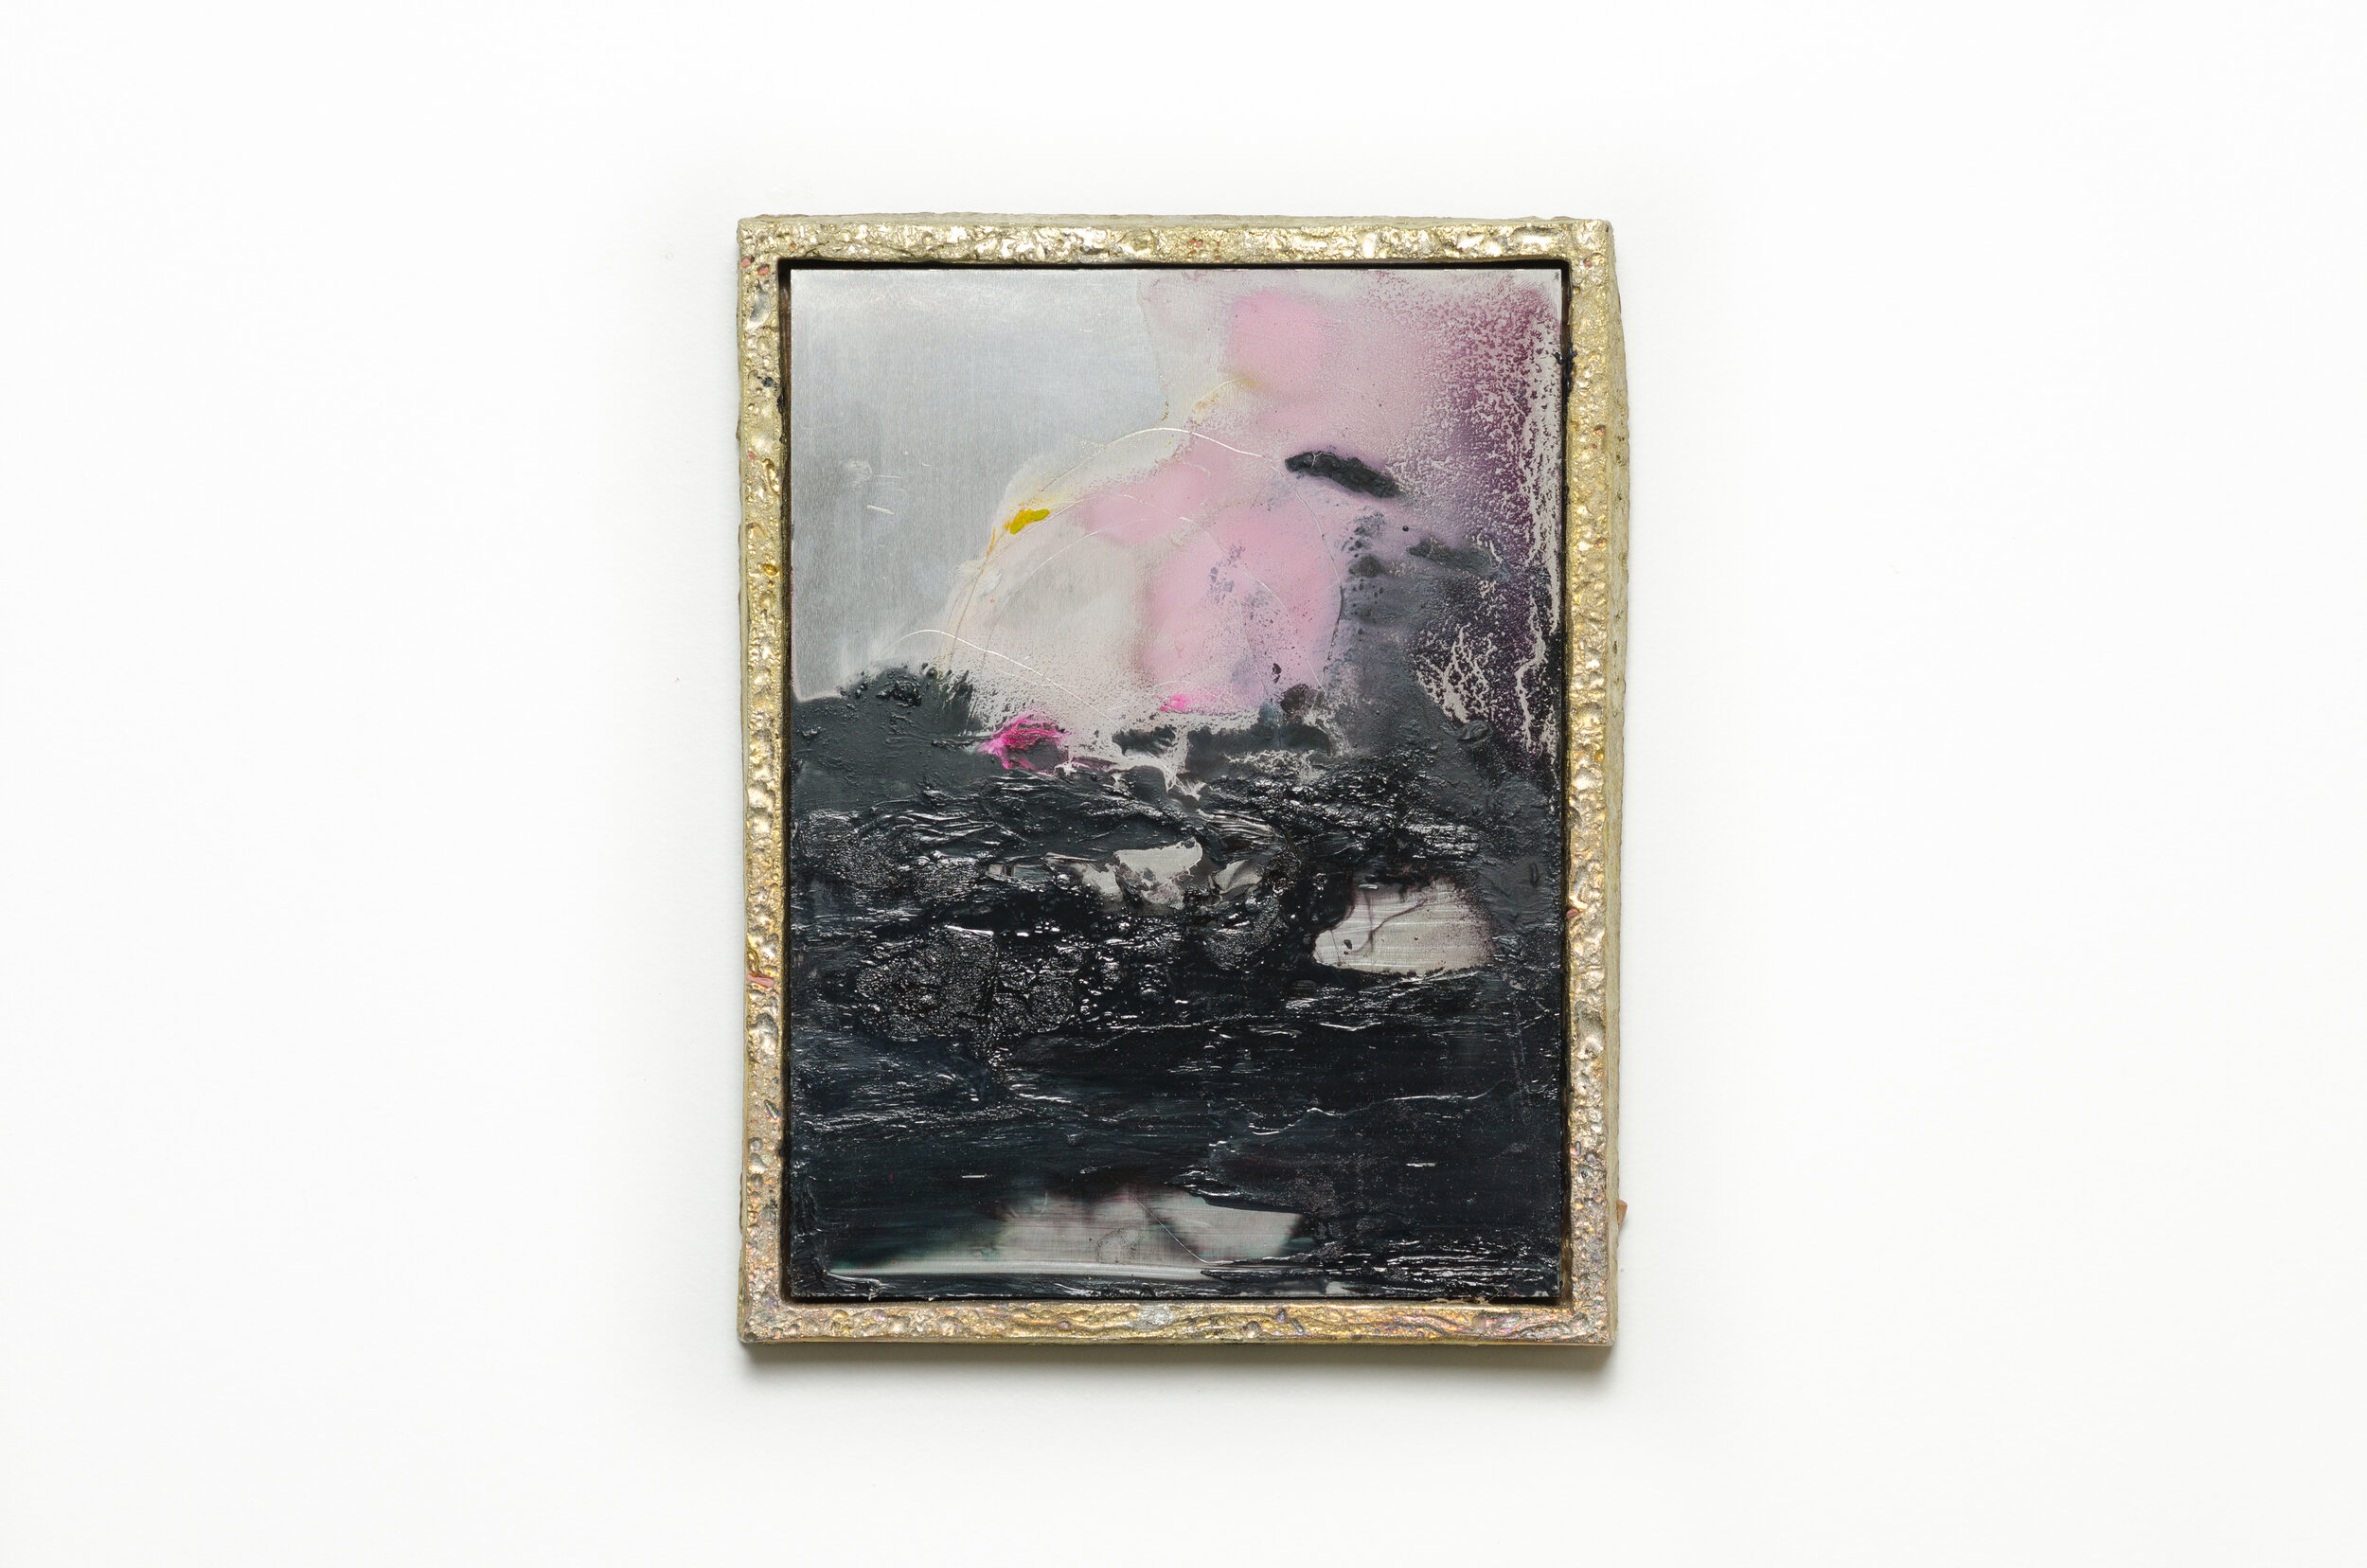   Low Hovel,  oil on aluminium, pewter frame, 2019, 160 x 210mm  Image credit: Mitchell Bright 